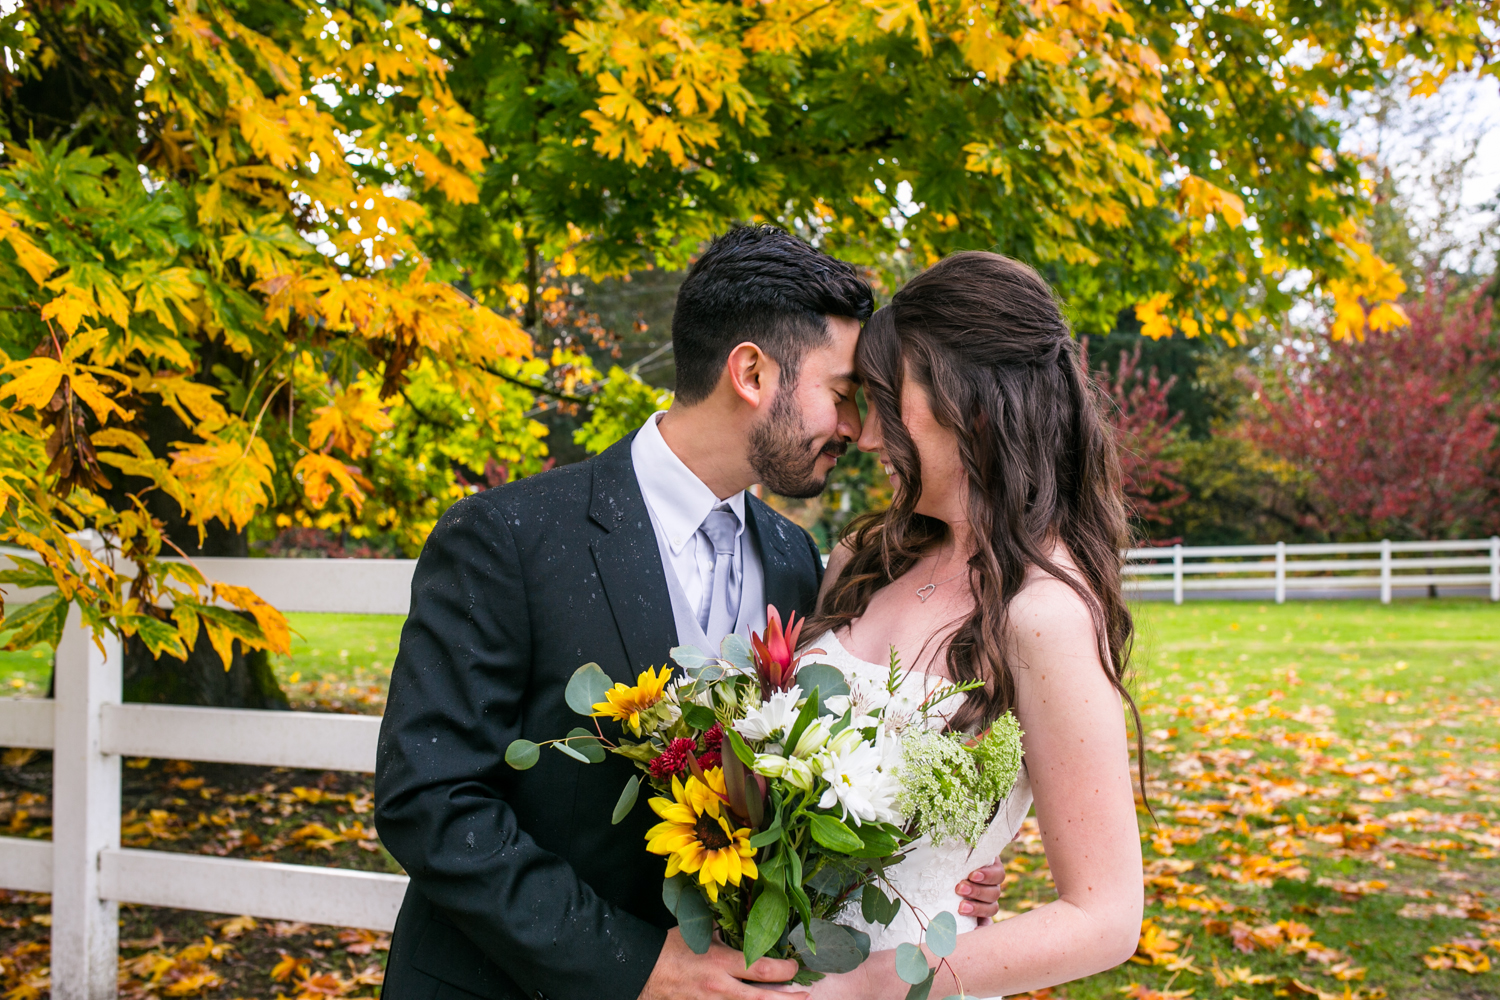 How to deal with rain on your wedding day: bride and groom during a break in the fall storm.